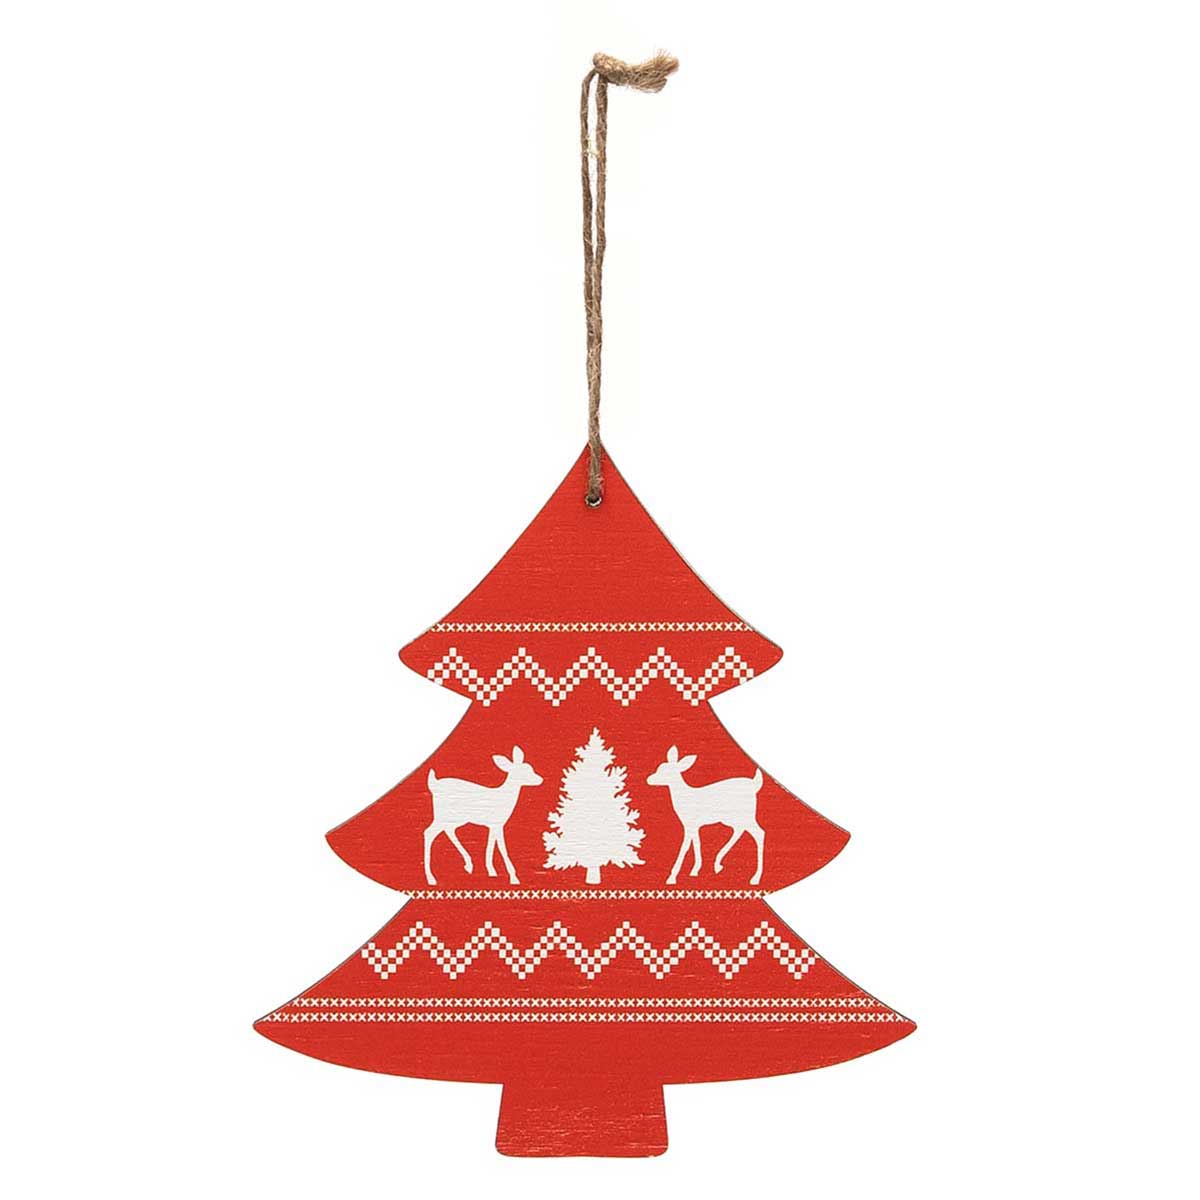 ORNAMENT SWEDISH TREE LARGE 5.75IN X .25IN X 6IN WOOD